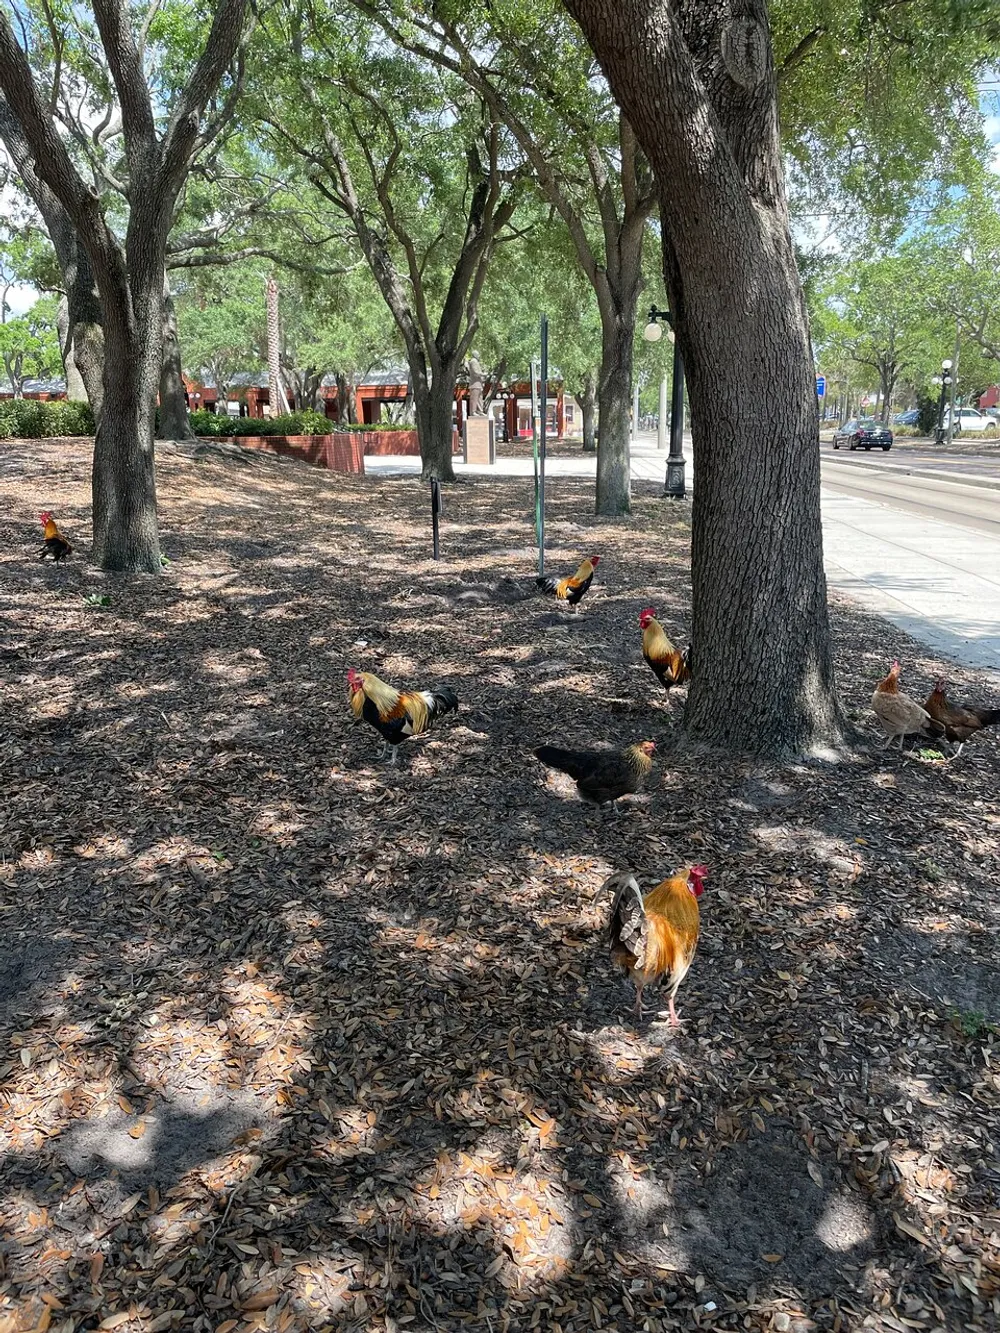 A group of chickens is wandering freely in a park with trees and fallen leaves with urban elements visible in the background